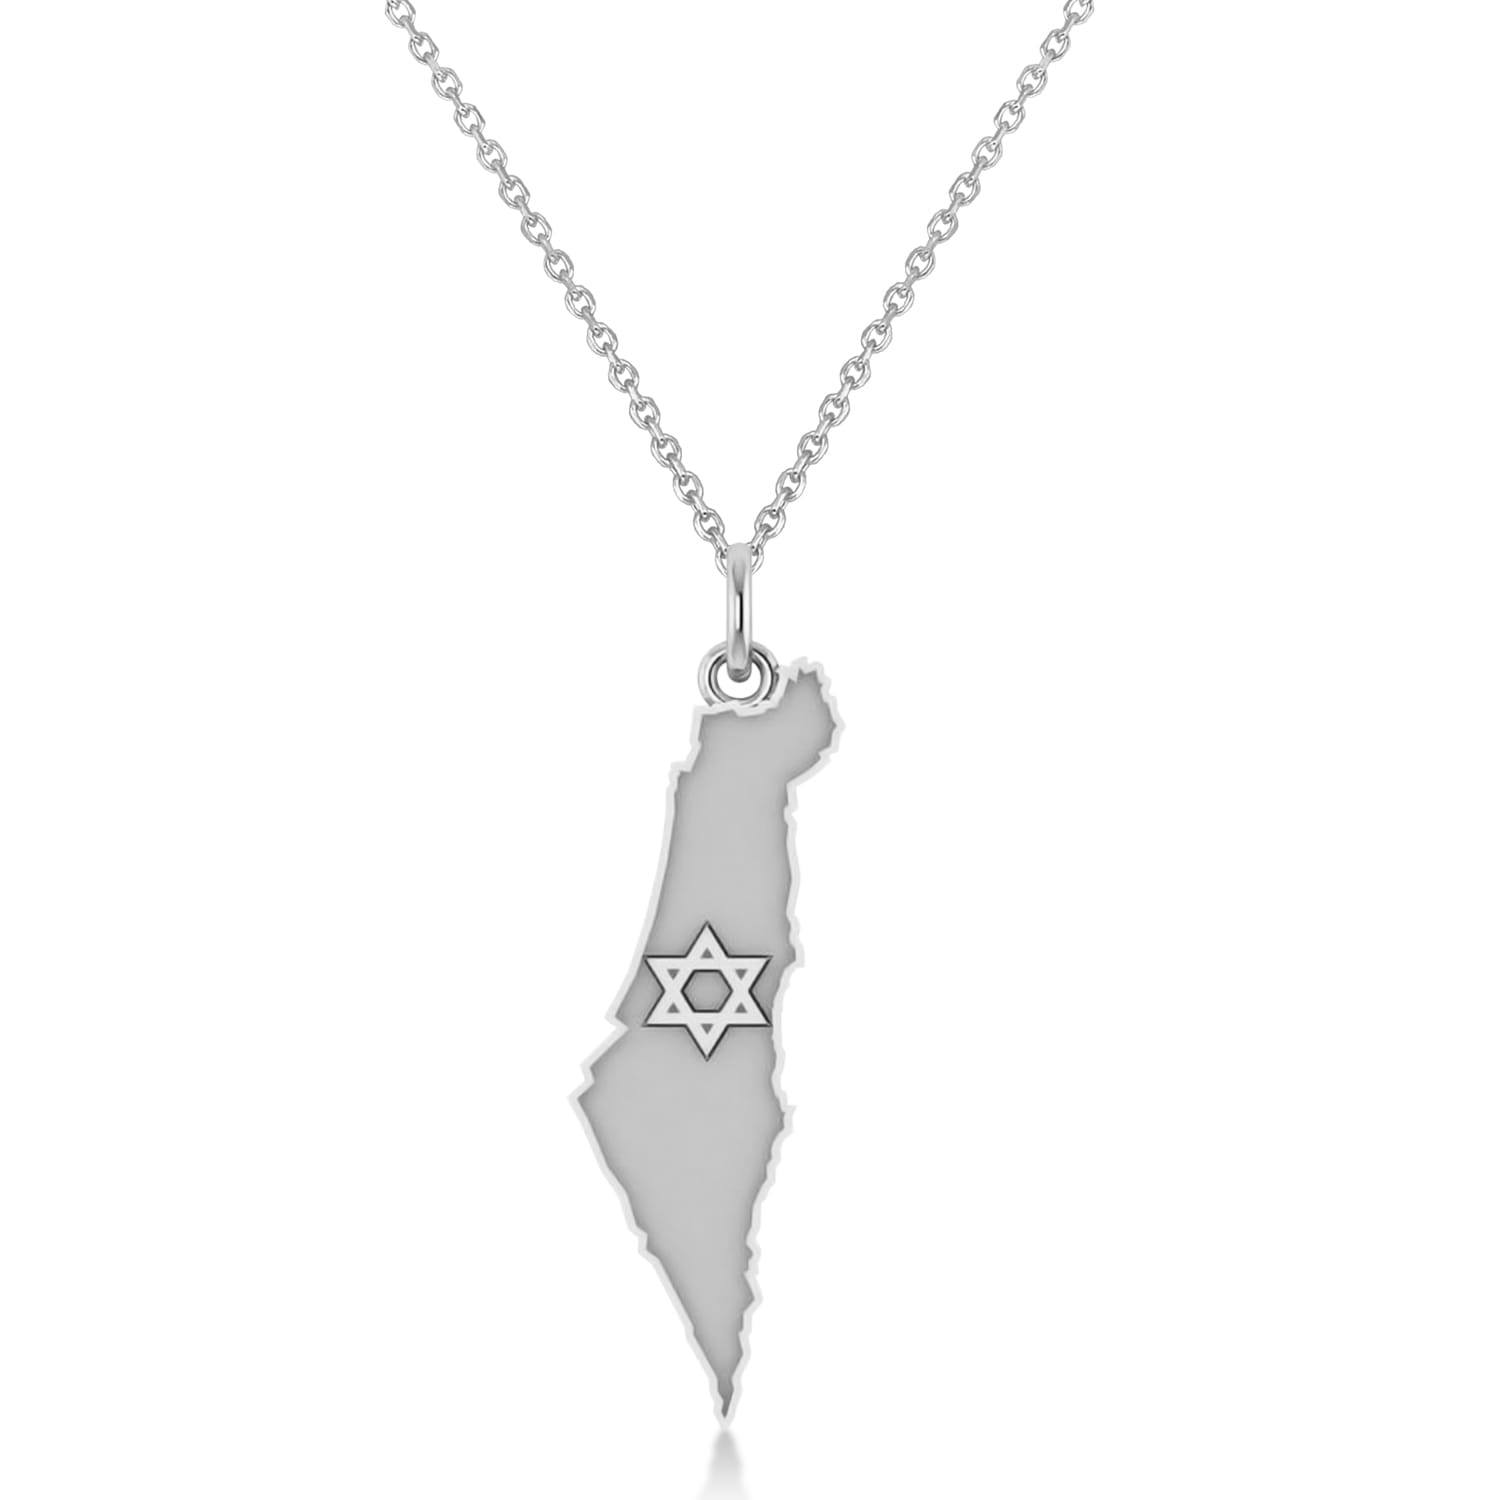 Israel Map Pendant Necklace in Sterling Silver